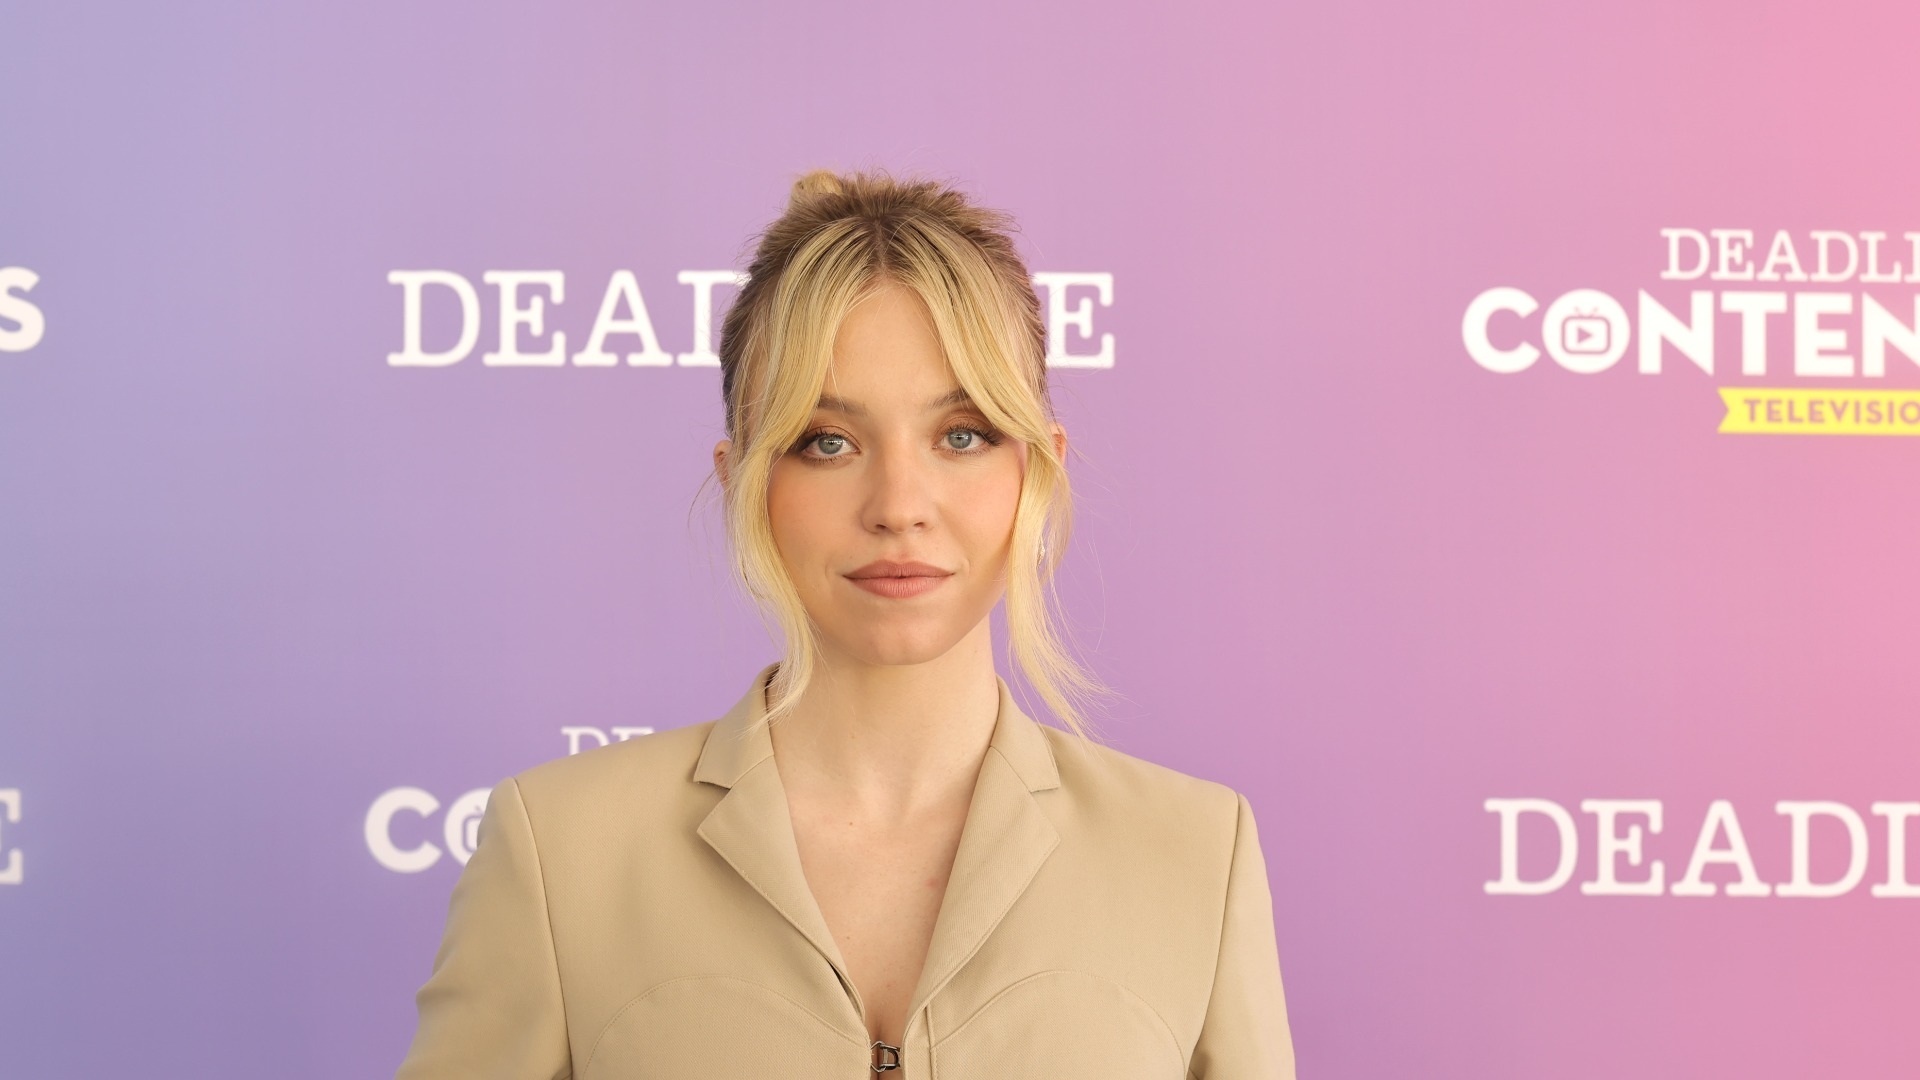 Sydney Sweeney says Euphoria‘s “safe environment” made her more “confident” with her body